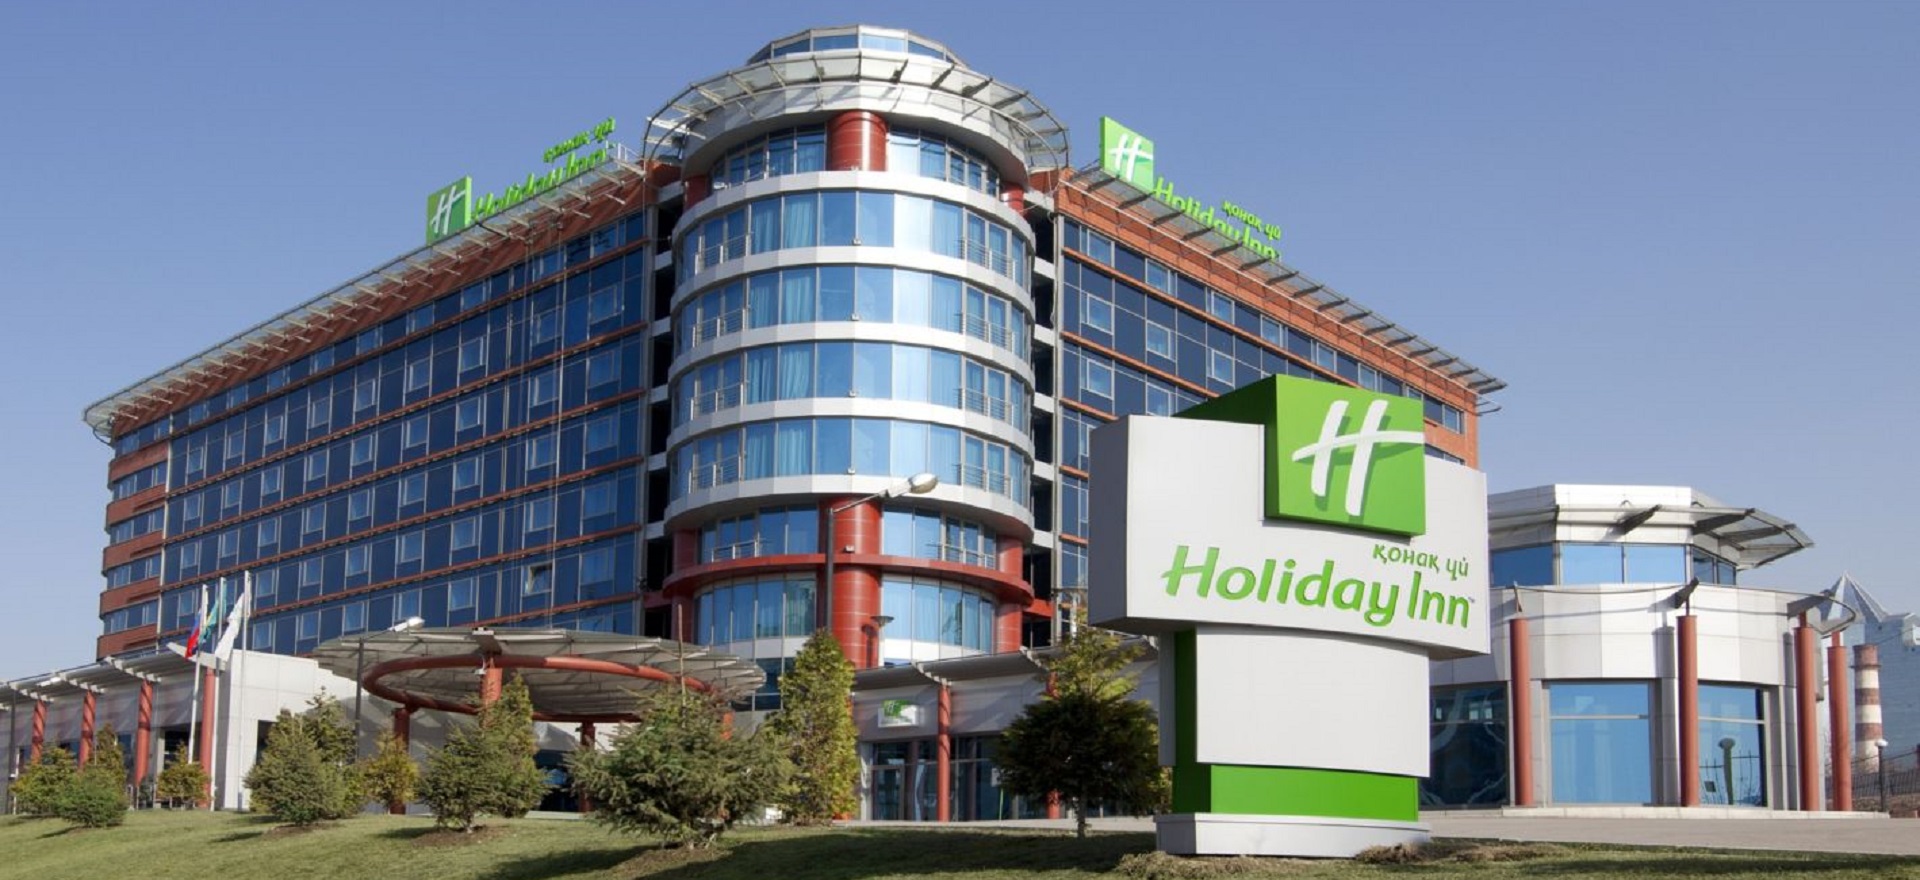 Official website of the Holiday Inn Almaty Hotel